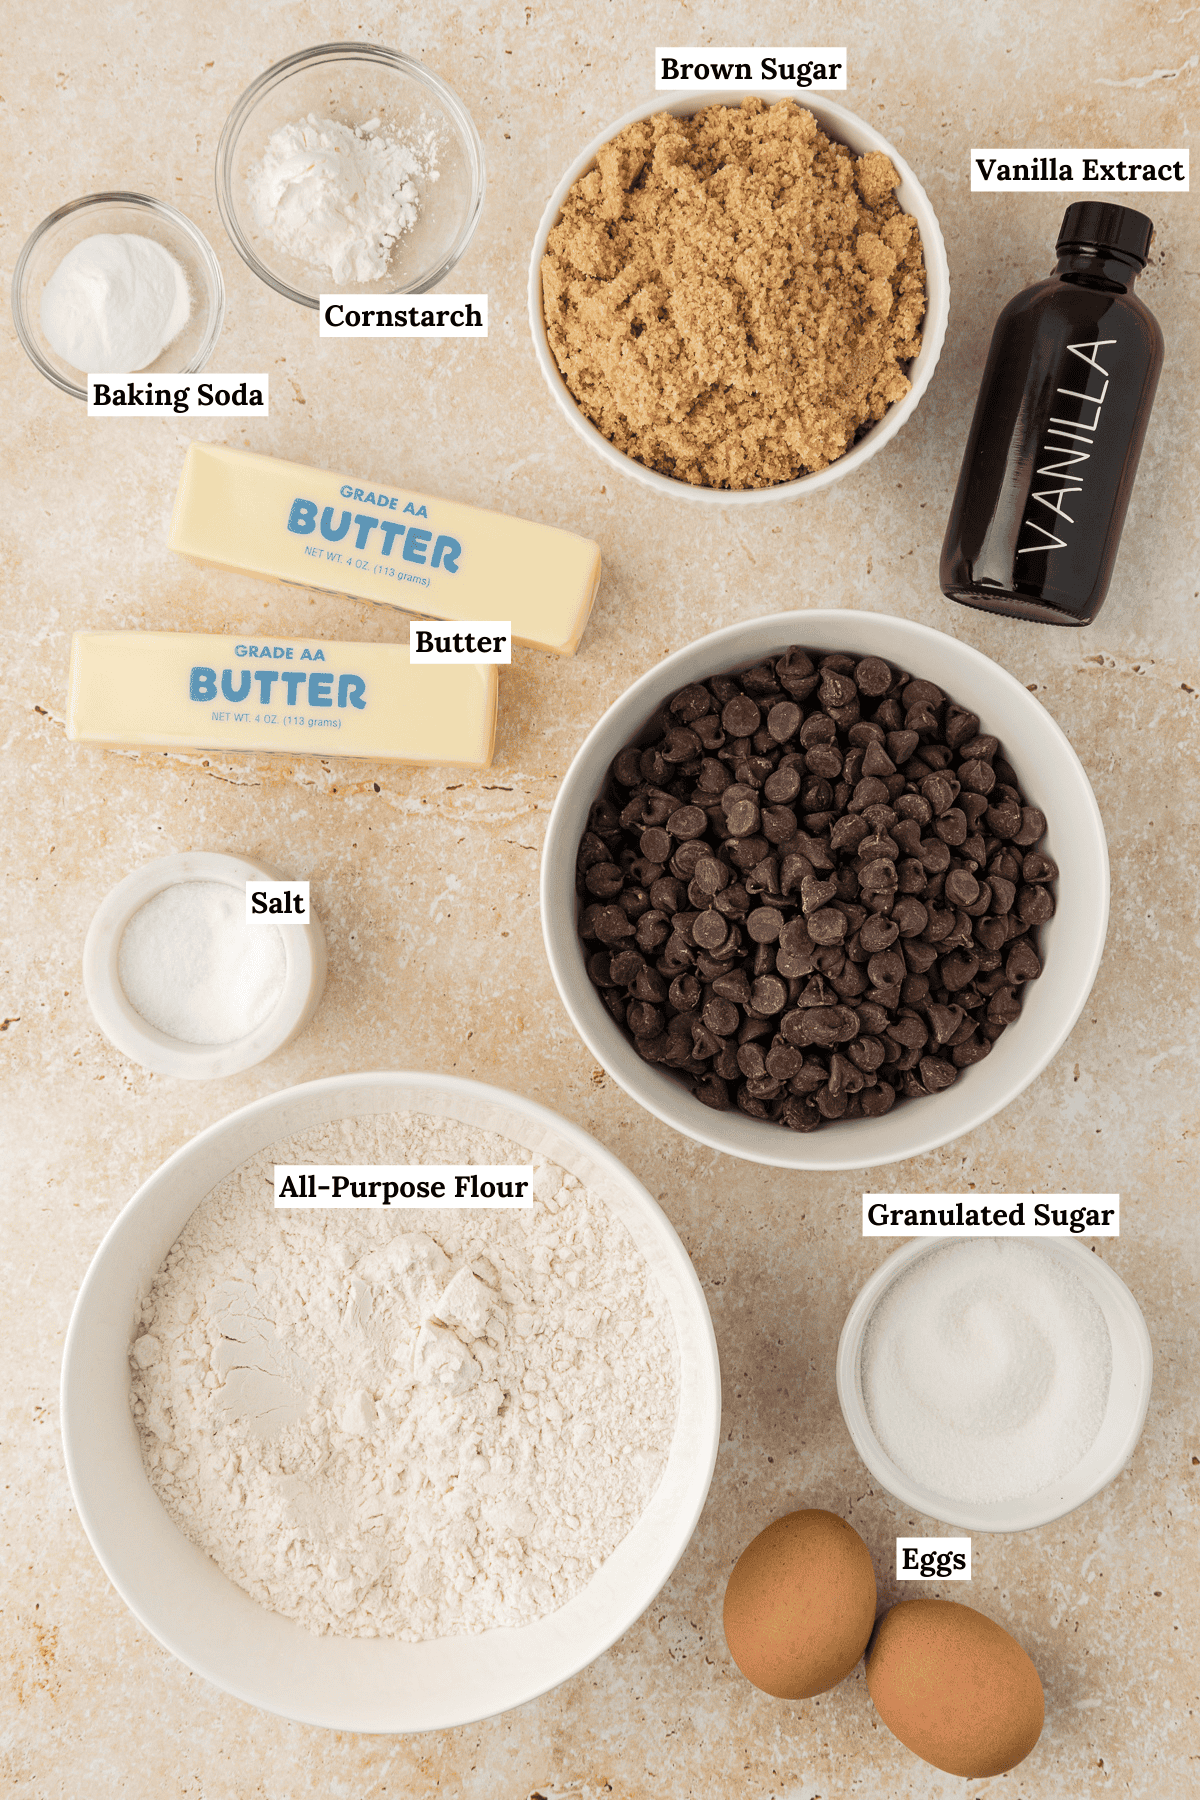 Overhead view of ingredients for pizookie including baking soda, cornstarch, brown sugar, vanilla extra, butter, chocolate chips, salt, all-purpose flour, granulated sugar and eggs